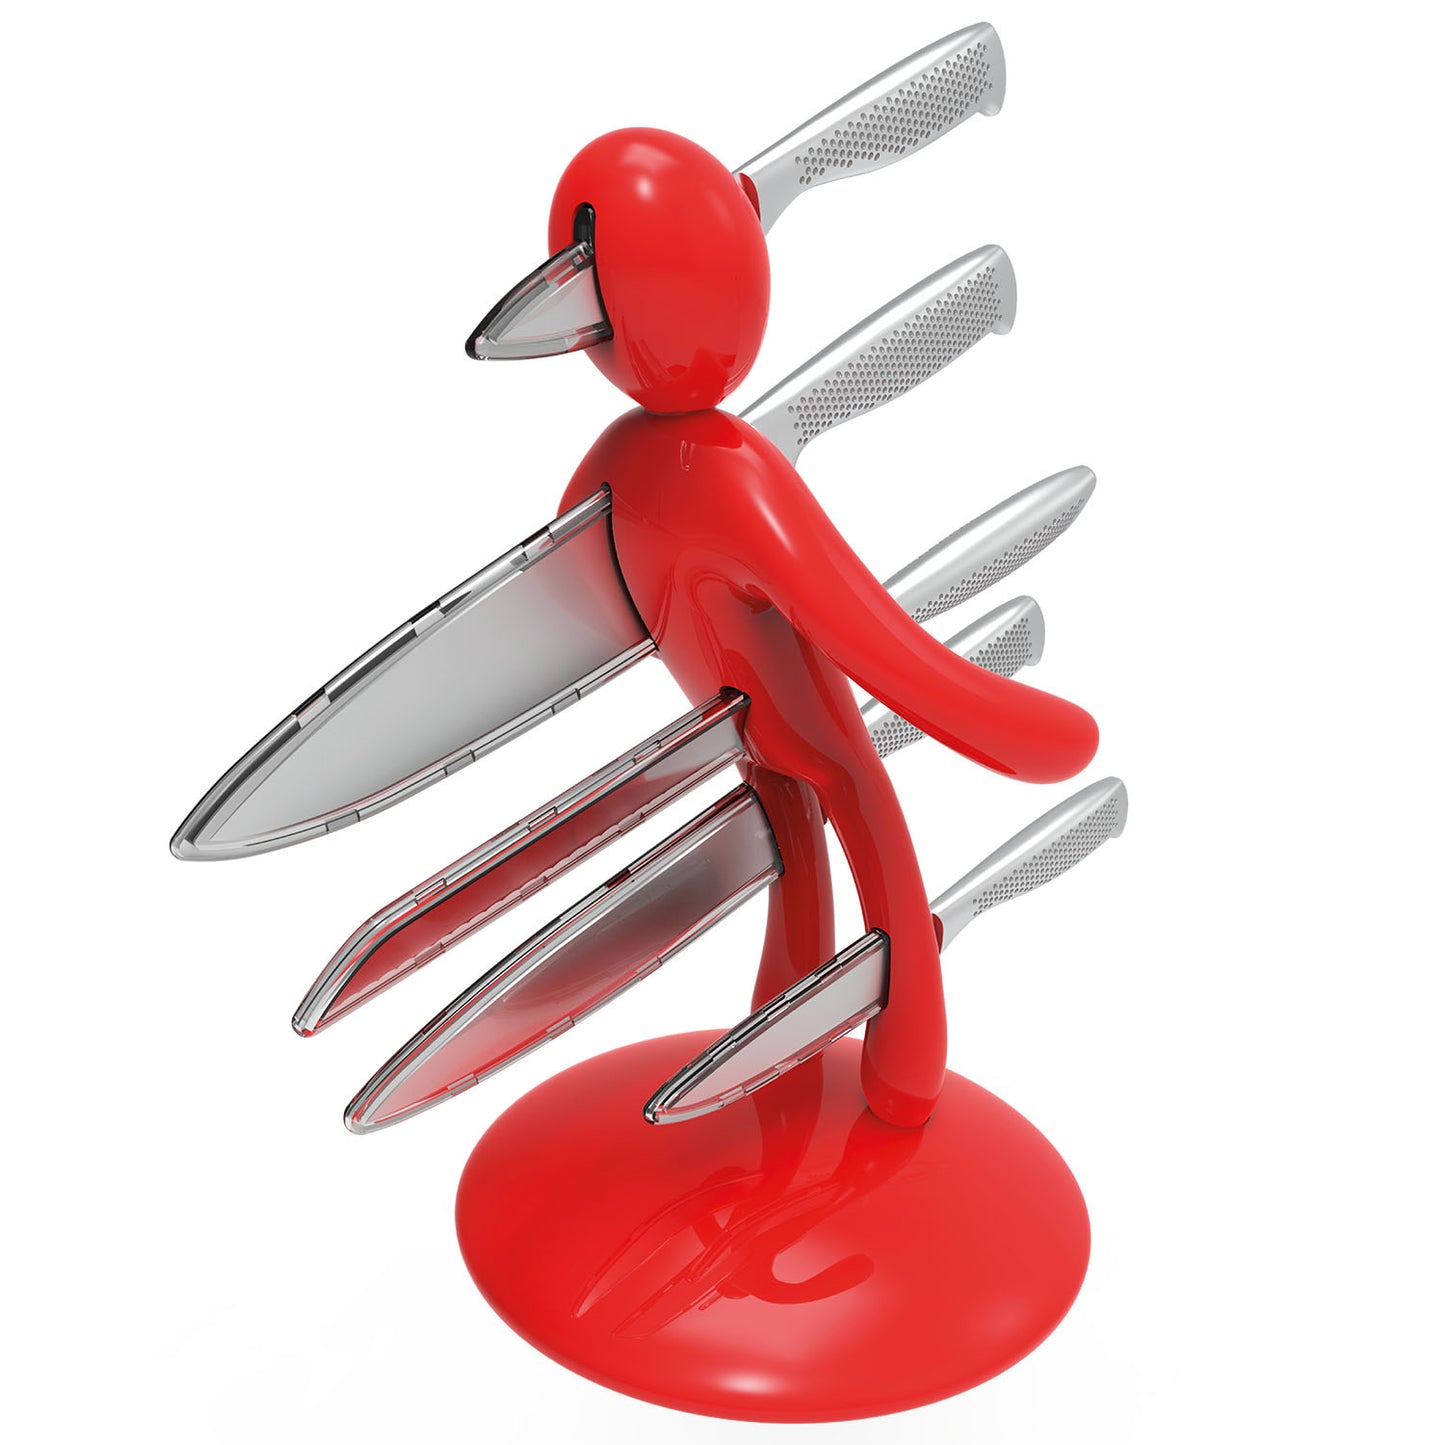 Voodoo/TheEx "Classic Edition" Knife Set - Red Plastic Holder